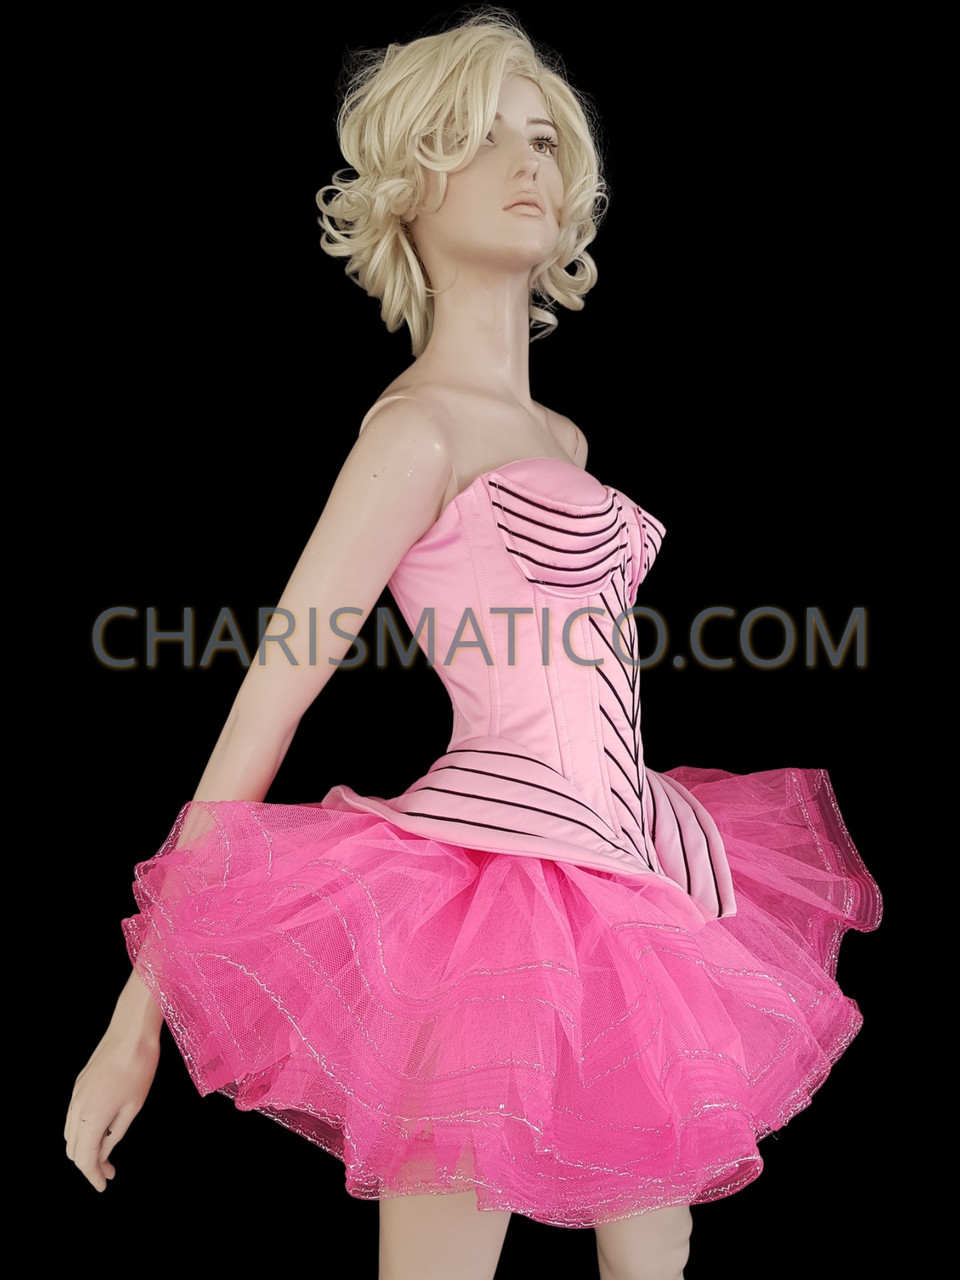 🌷 Pink Basque Corset Dress 🪷 In the embrace of the pink basque corset  dress, elegance is personified, curves sculpted, and dreams